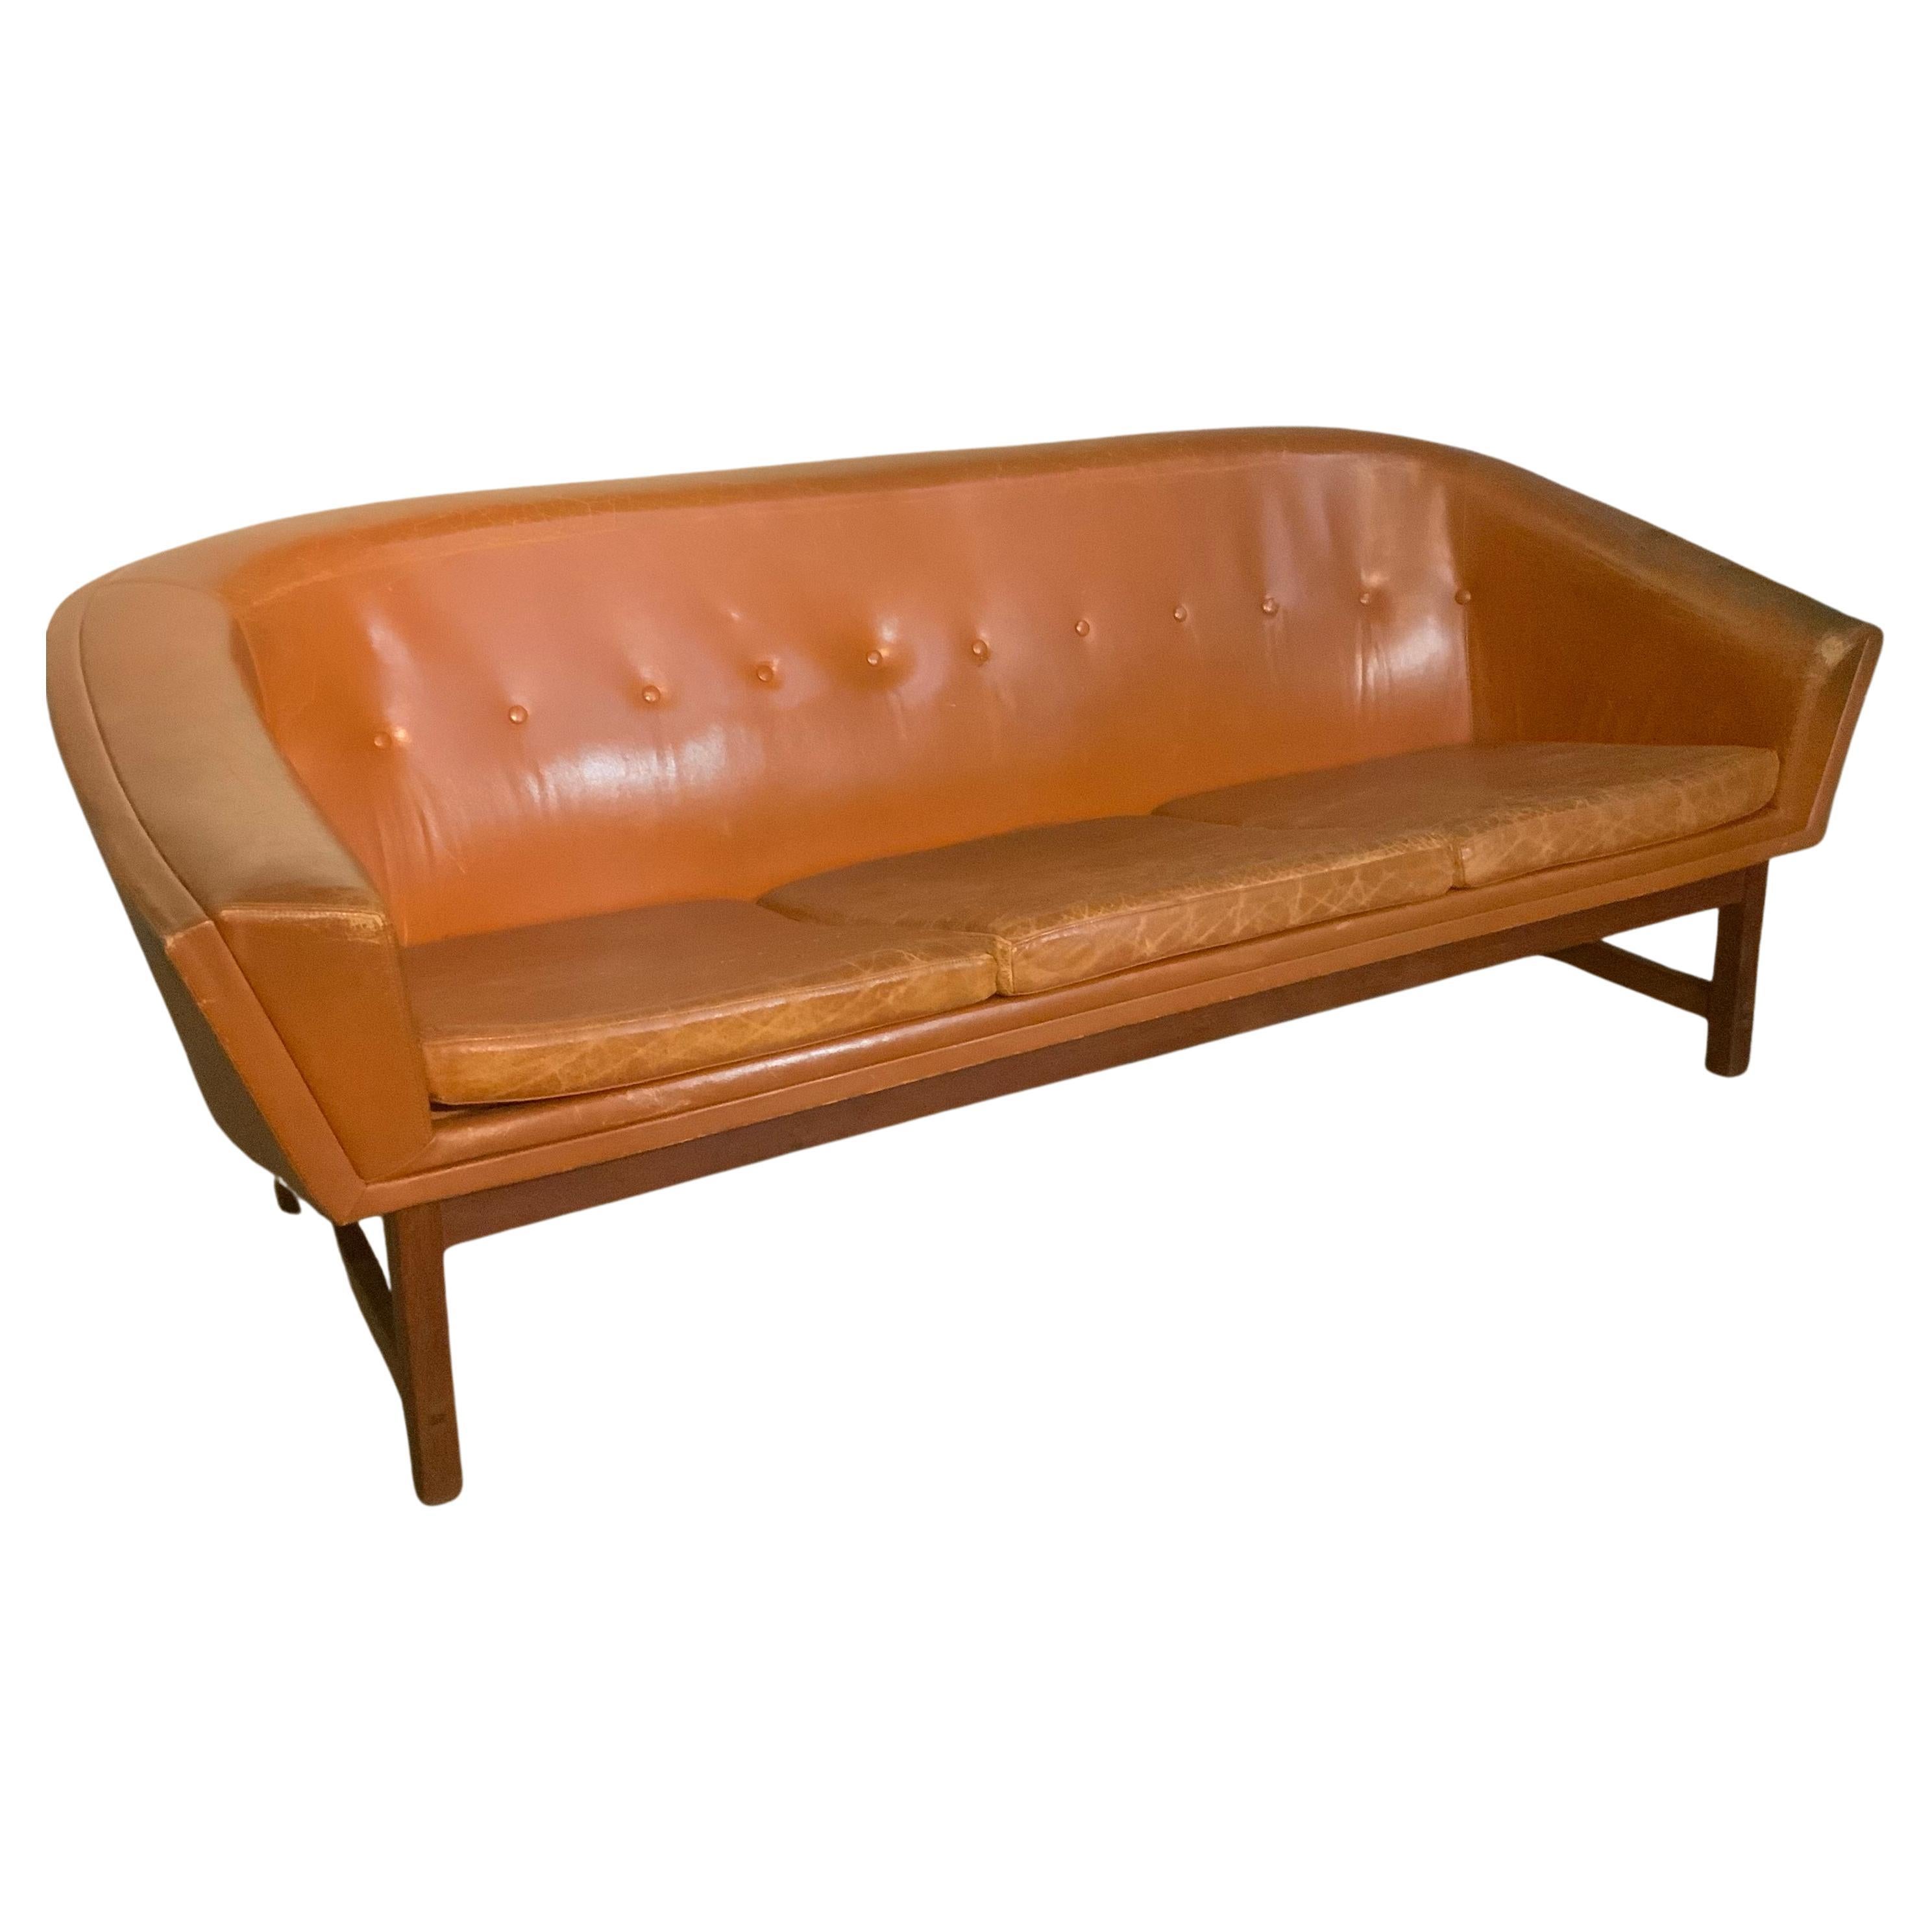 Lennart Bender "Corona" Leather Couch Sweden 1960 For Sale at 1stDibs